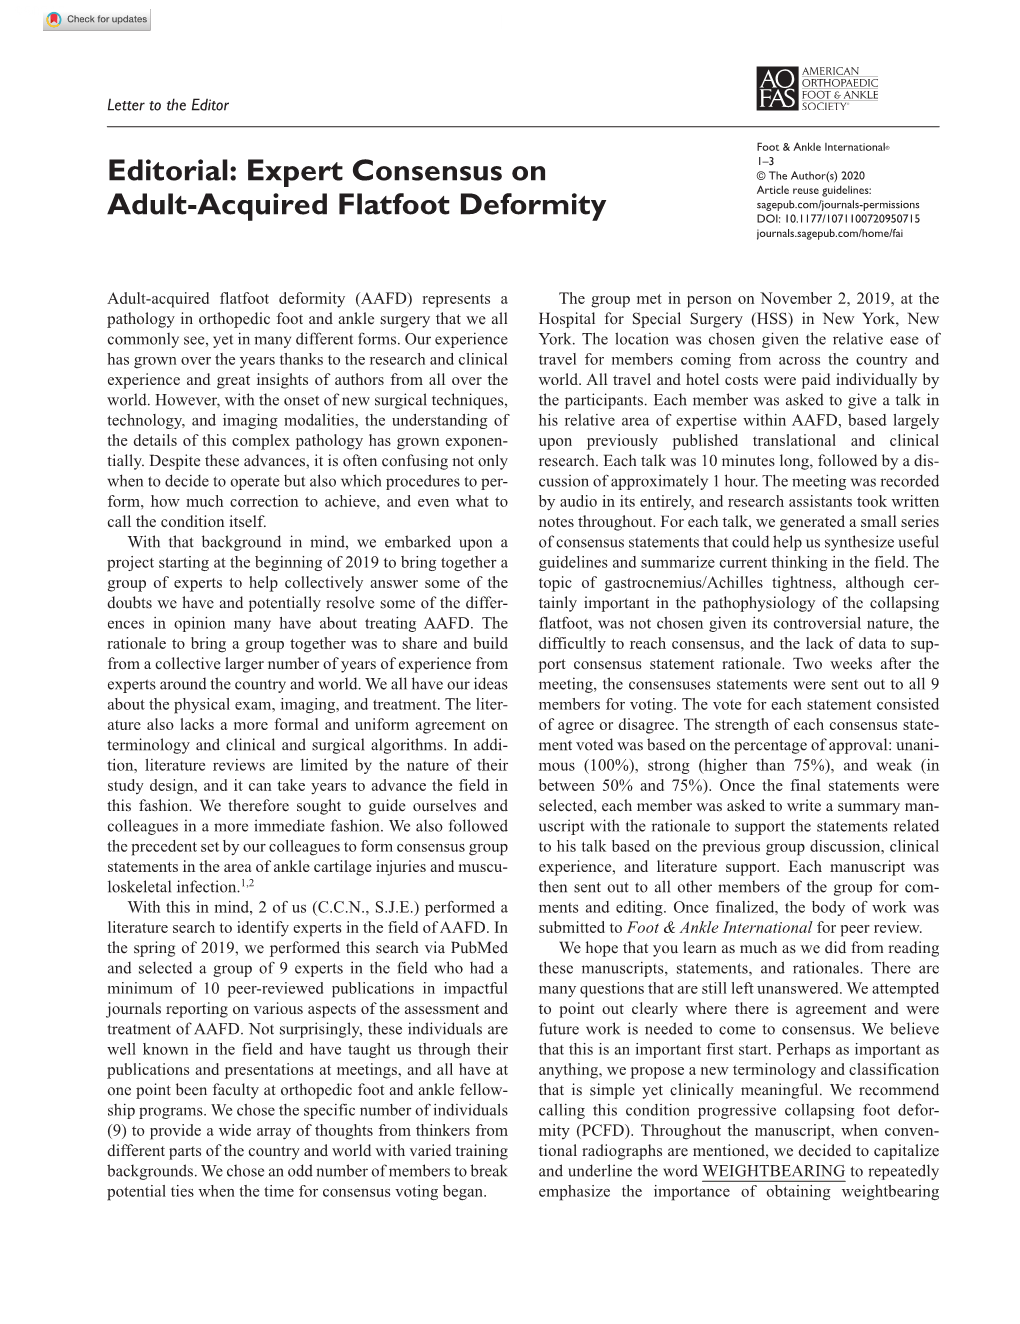 Expert Consensus on Adult-Acquired Flatfoot Deformity